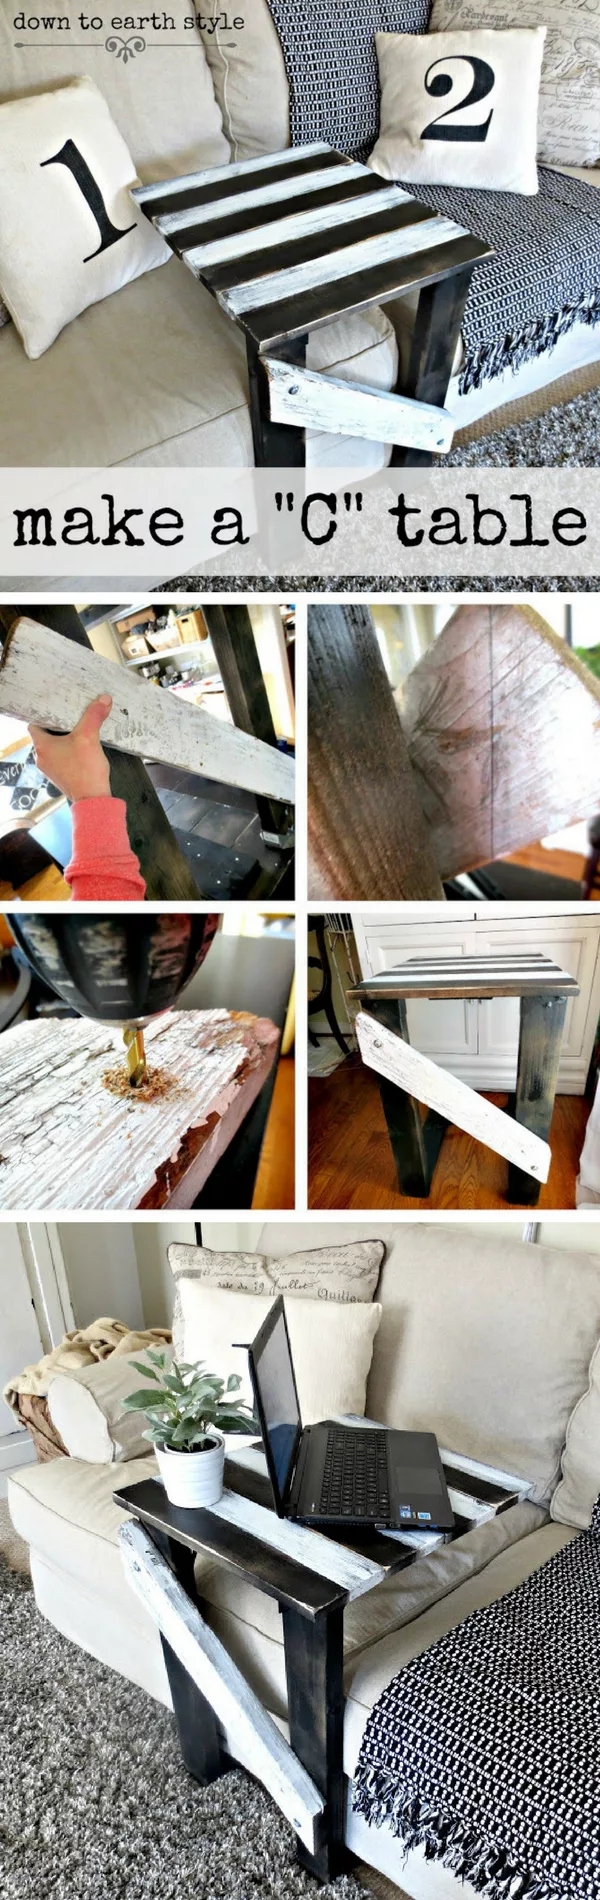 18 Easy DIY Sofa Side Tables You Can Build on a Budget - Check out the tutorial how make a DIY sofa side c-table